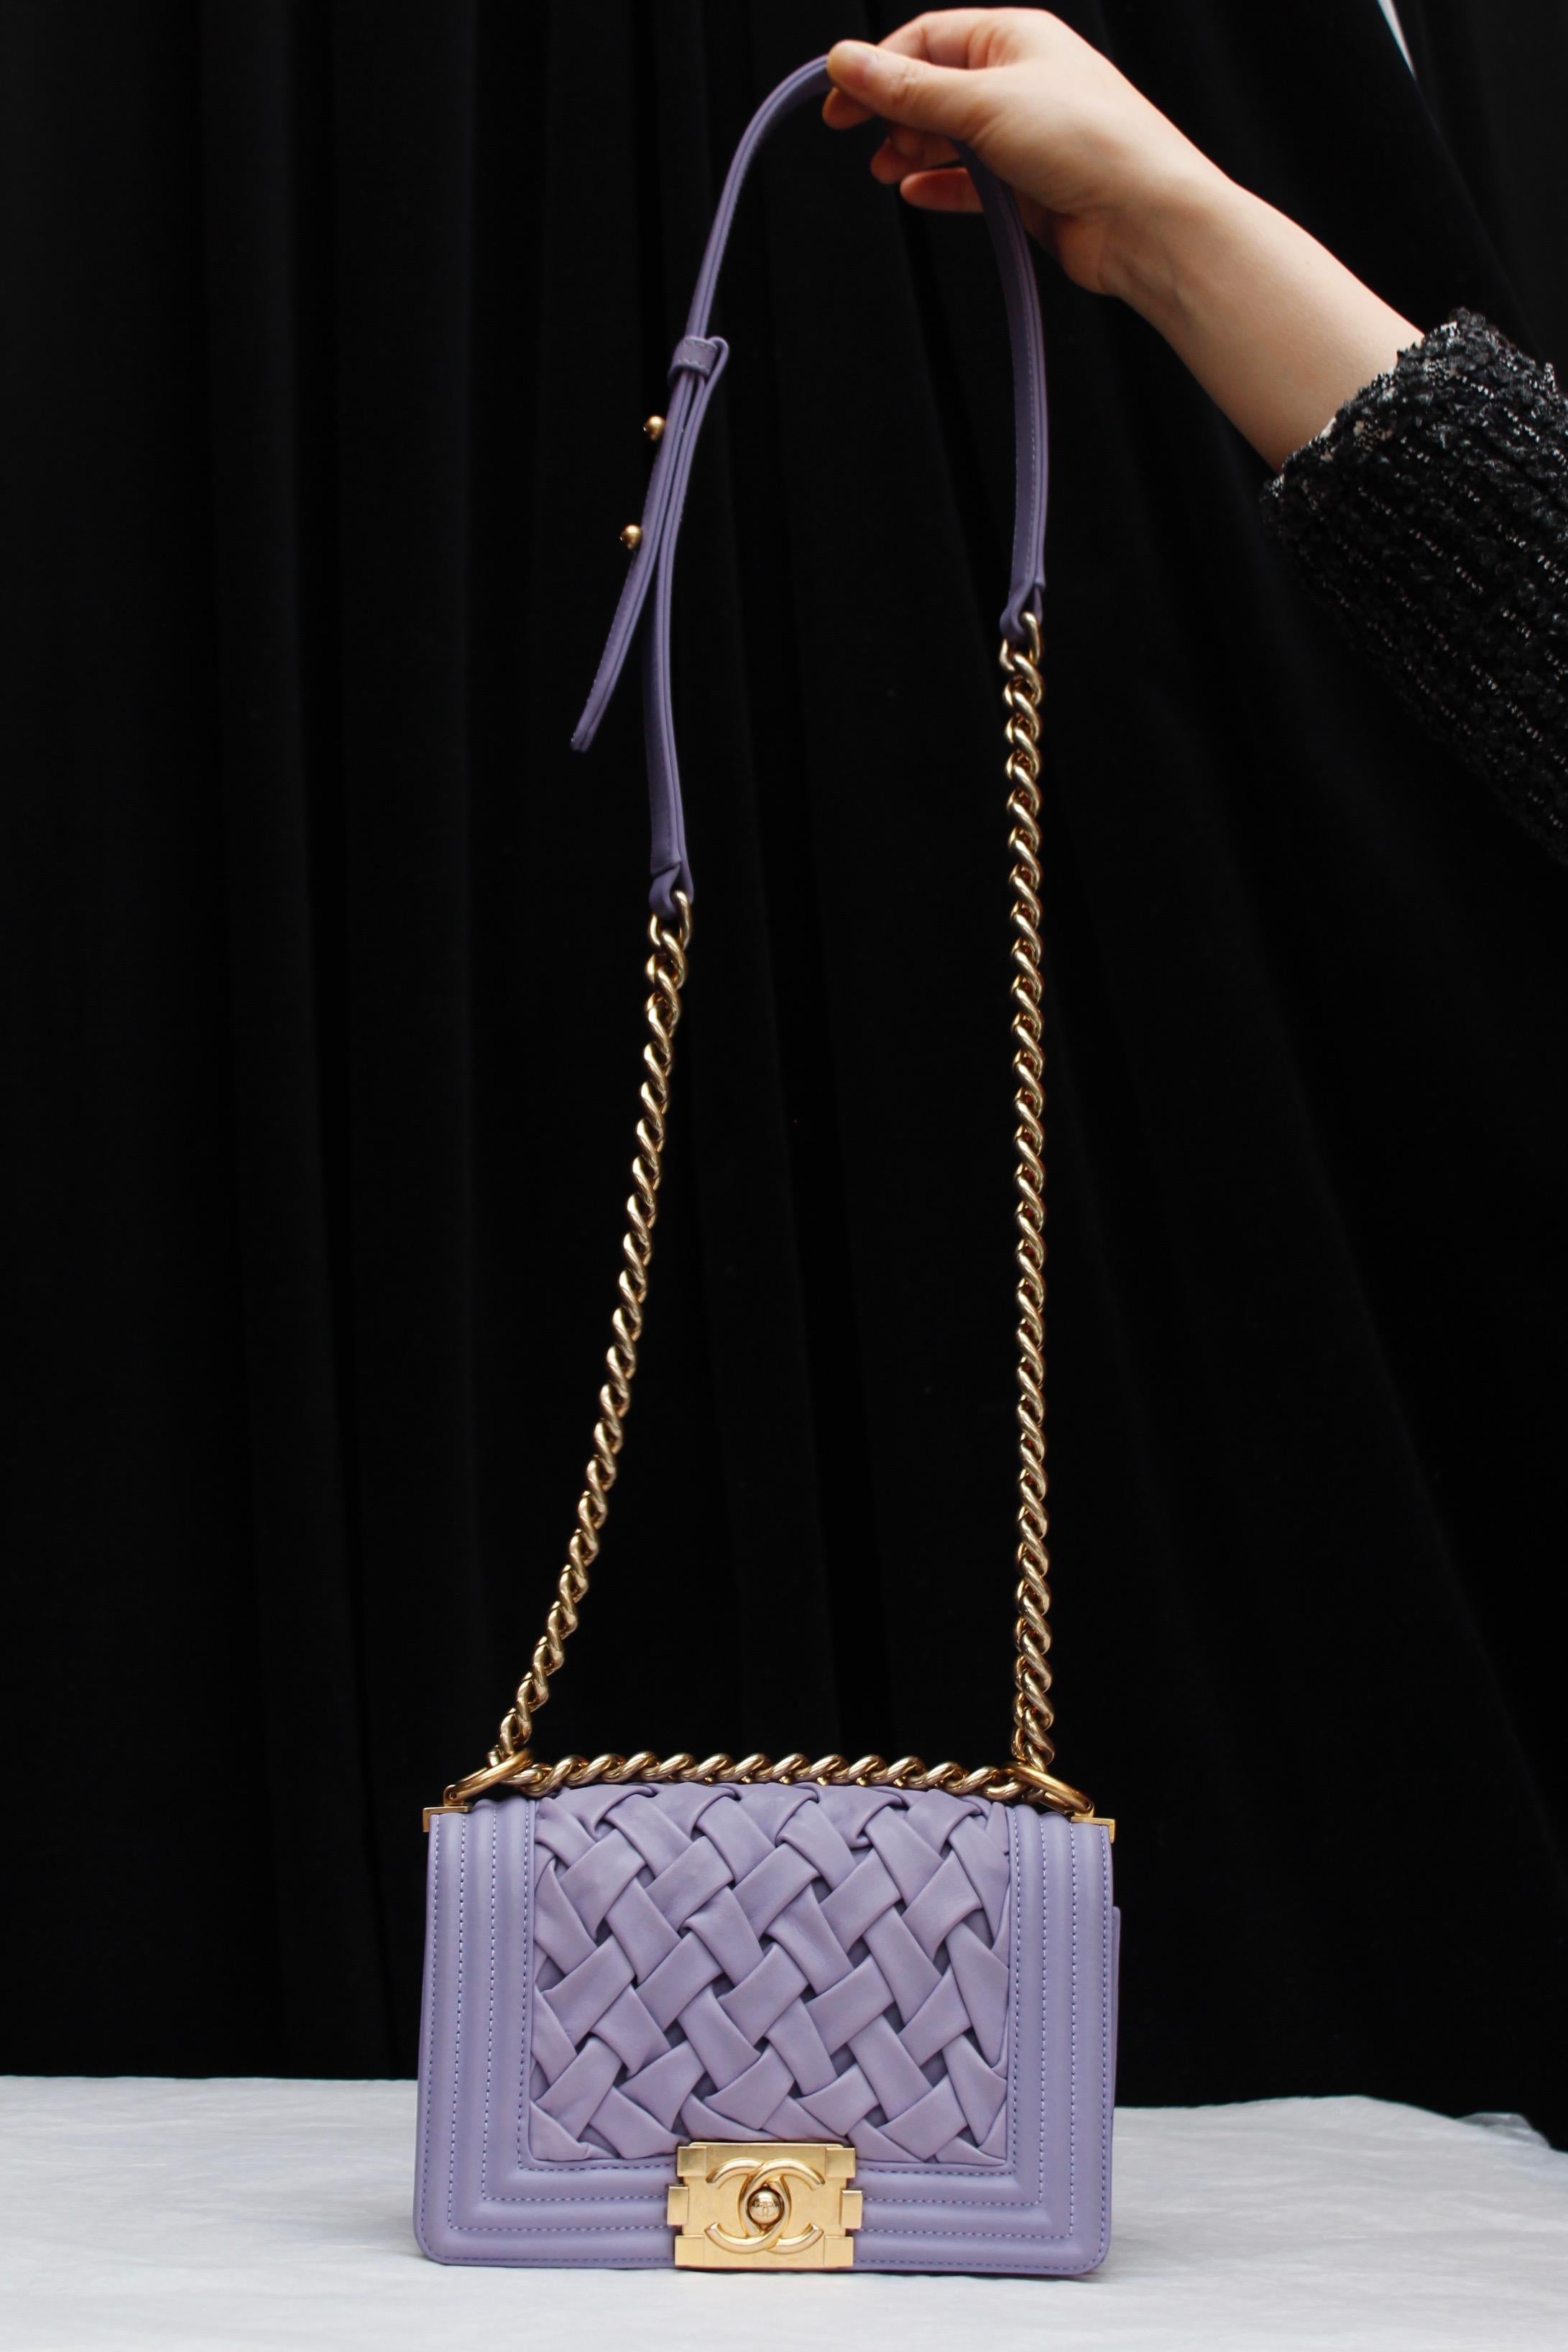 CHANEL (Made in France) Fabulous BOY bag in mauve lambskin. The flap is composed of woven leather strips. It can be worn over the shoulder or cross-body, thanks to a mate gilded metal chain with mauve leather strap. Gilded metal CC kiss lock. Sand